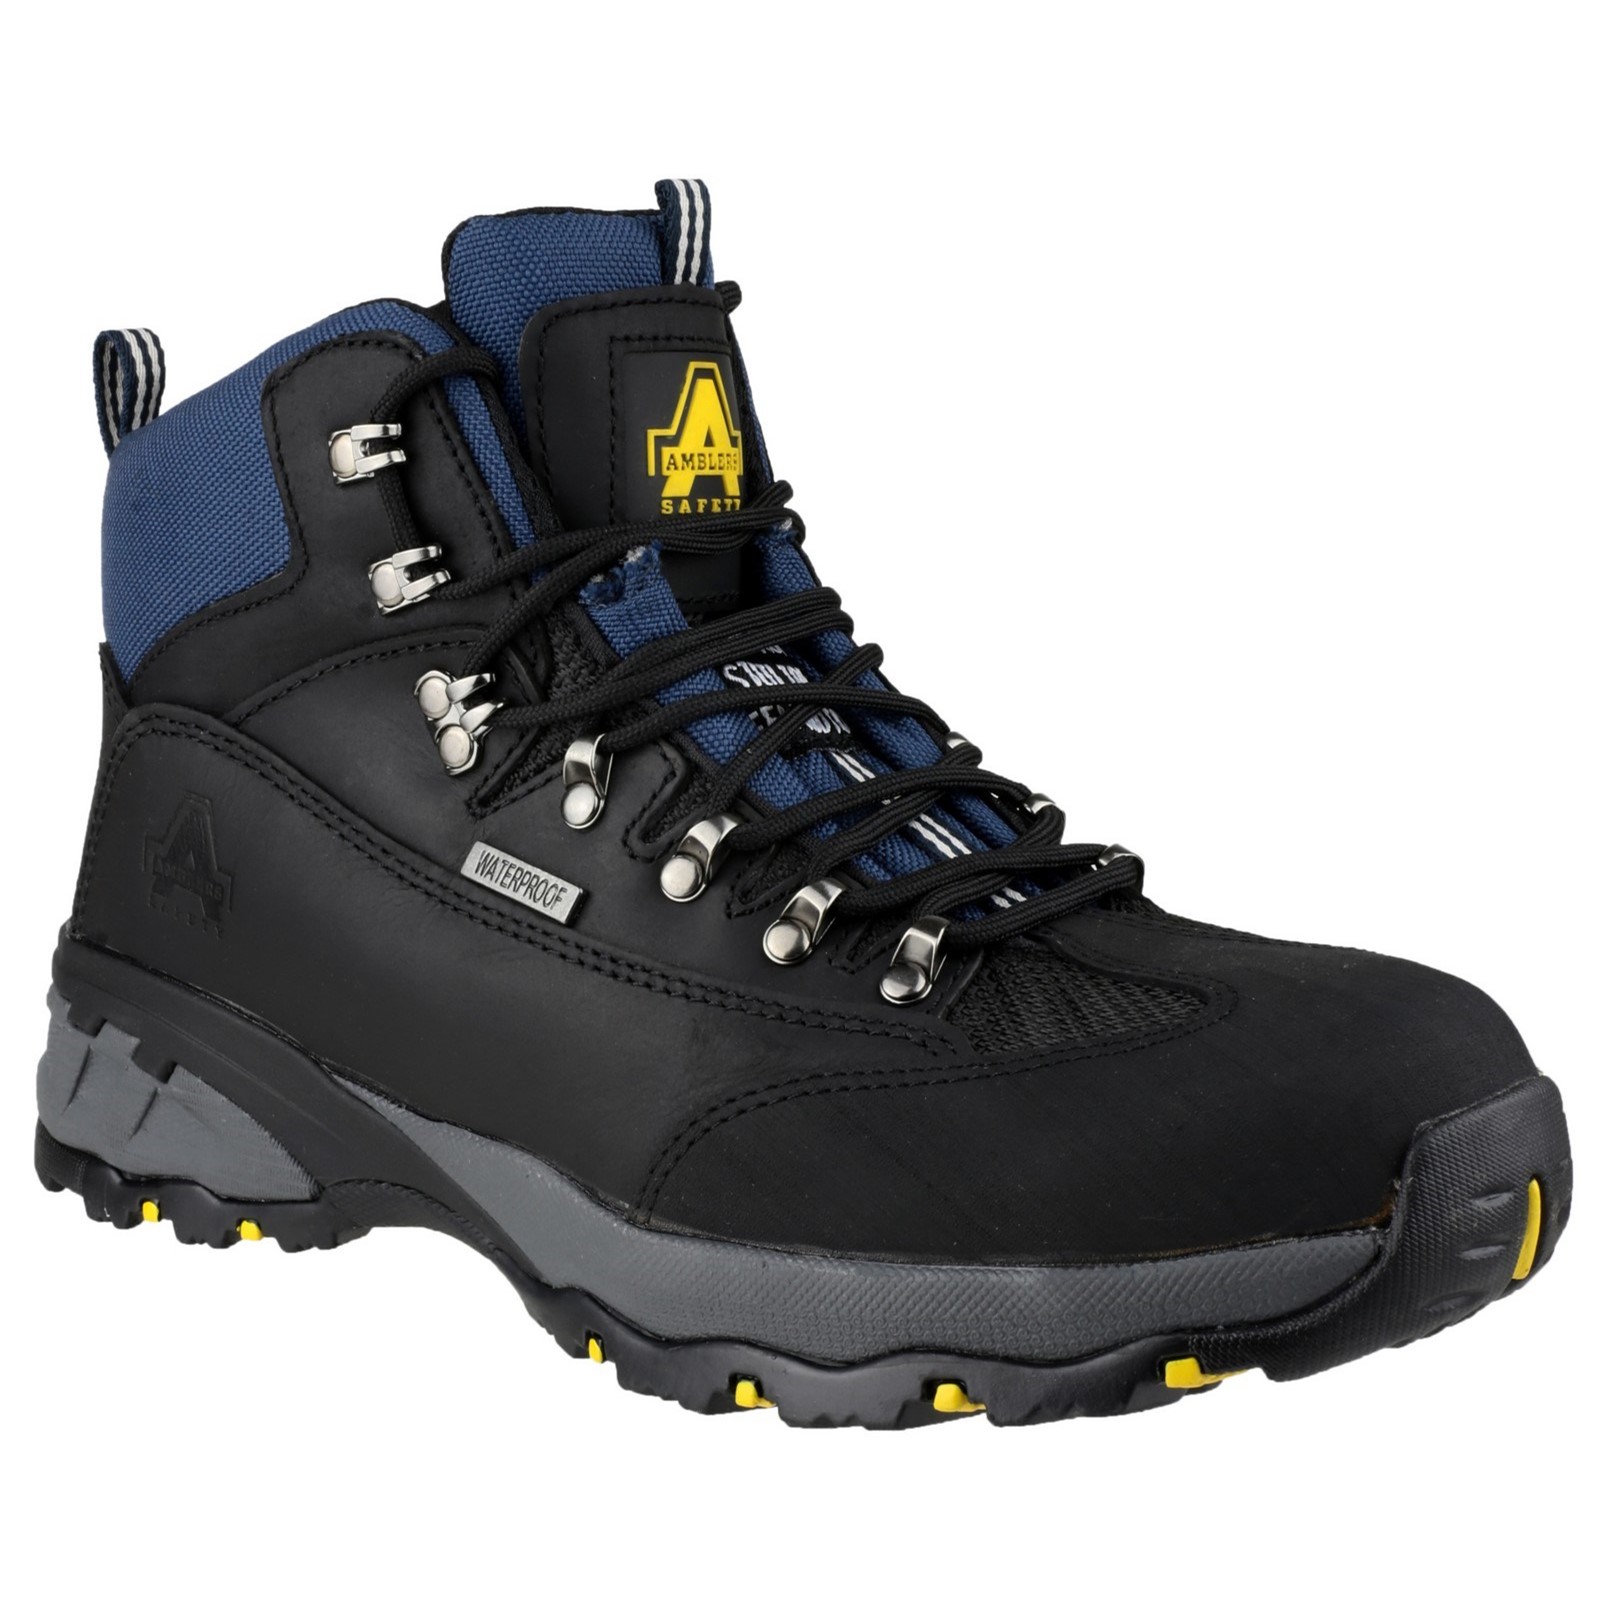 FS161 Waterproof Lace up Hiker Safety Boot